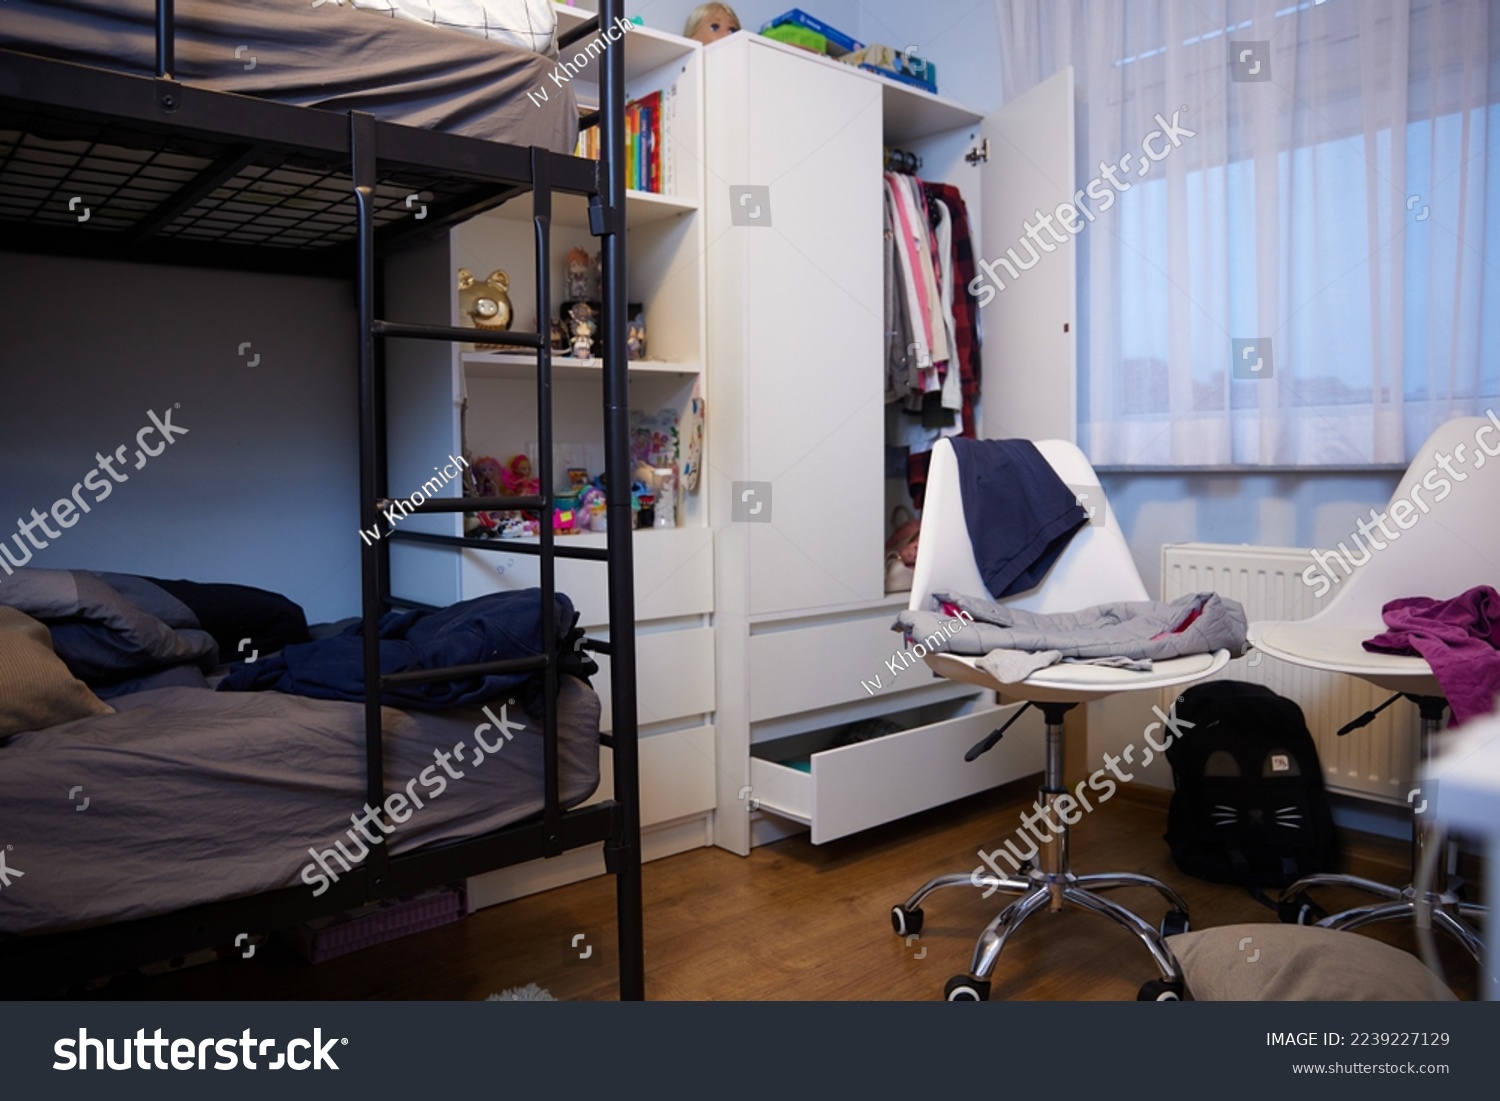 mess, disorder and interior concept - view of messy home kid's room with scattered stuff #2239227129